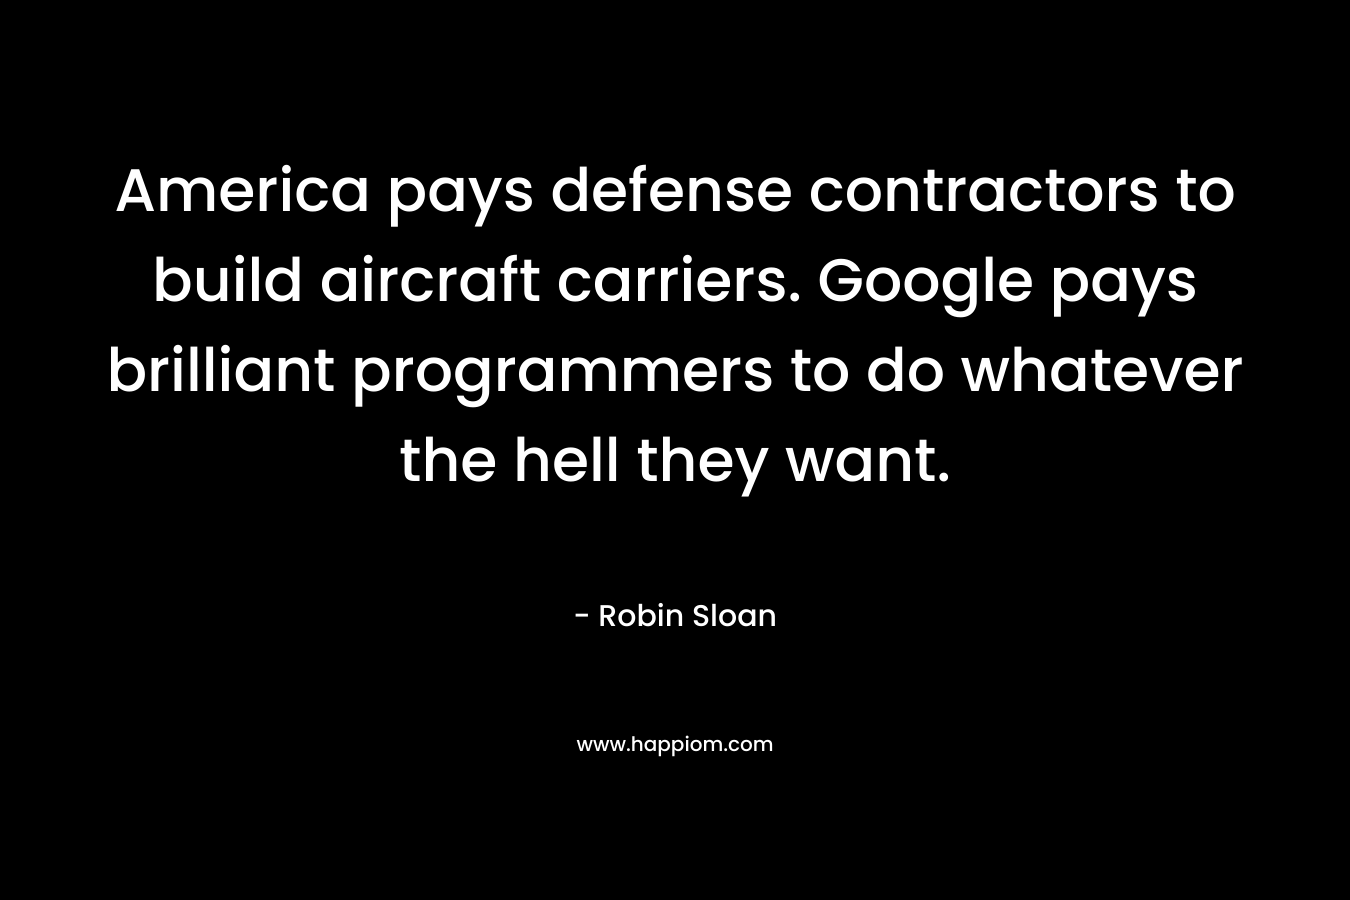 America pays defense contractors to build aircraft carriers. Google pays brilliant programmers to do whatever the hell they want. – Robin Sloan